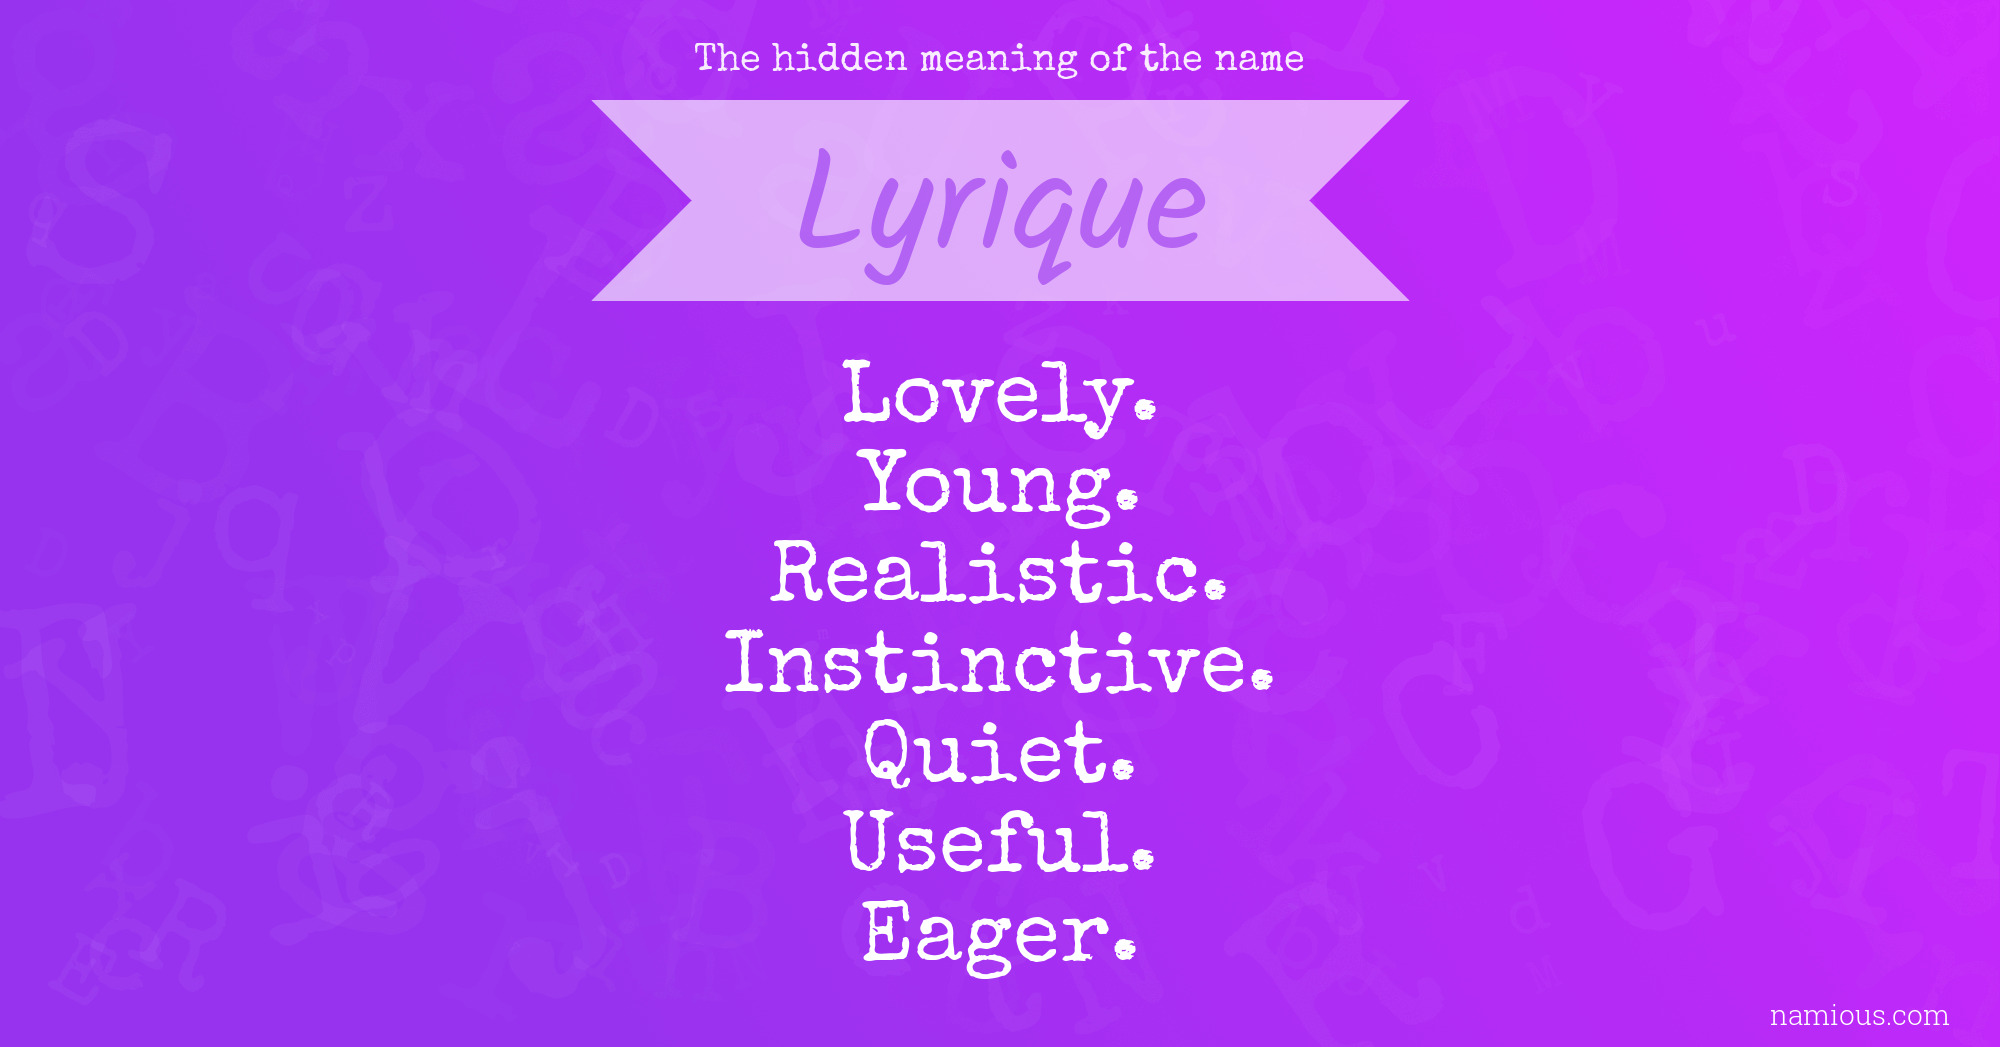 The hidden meaning of the name Lyrique